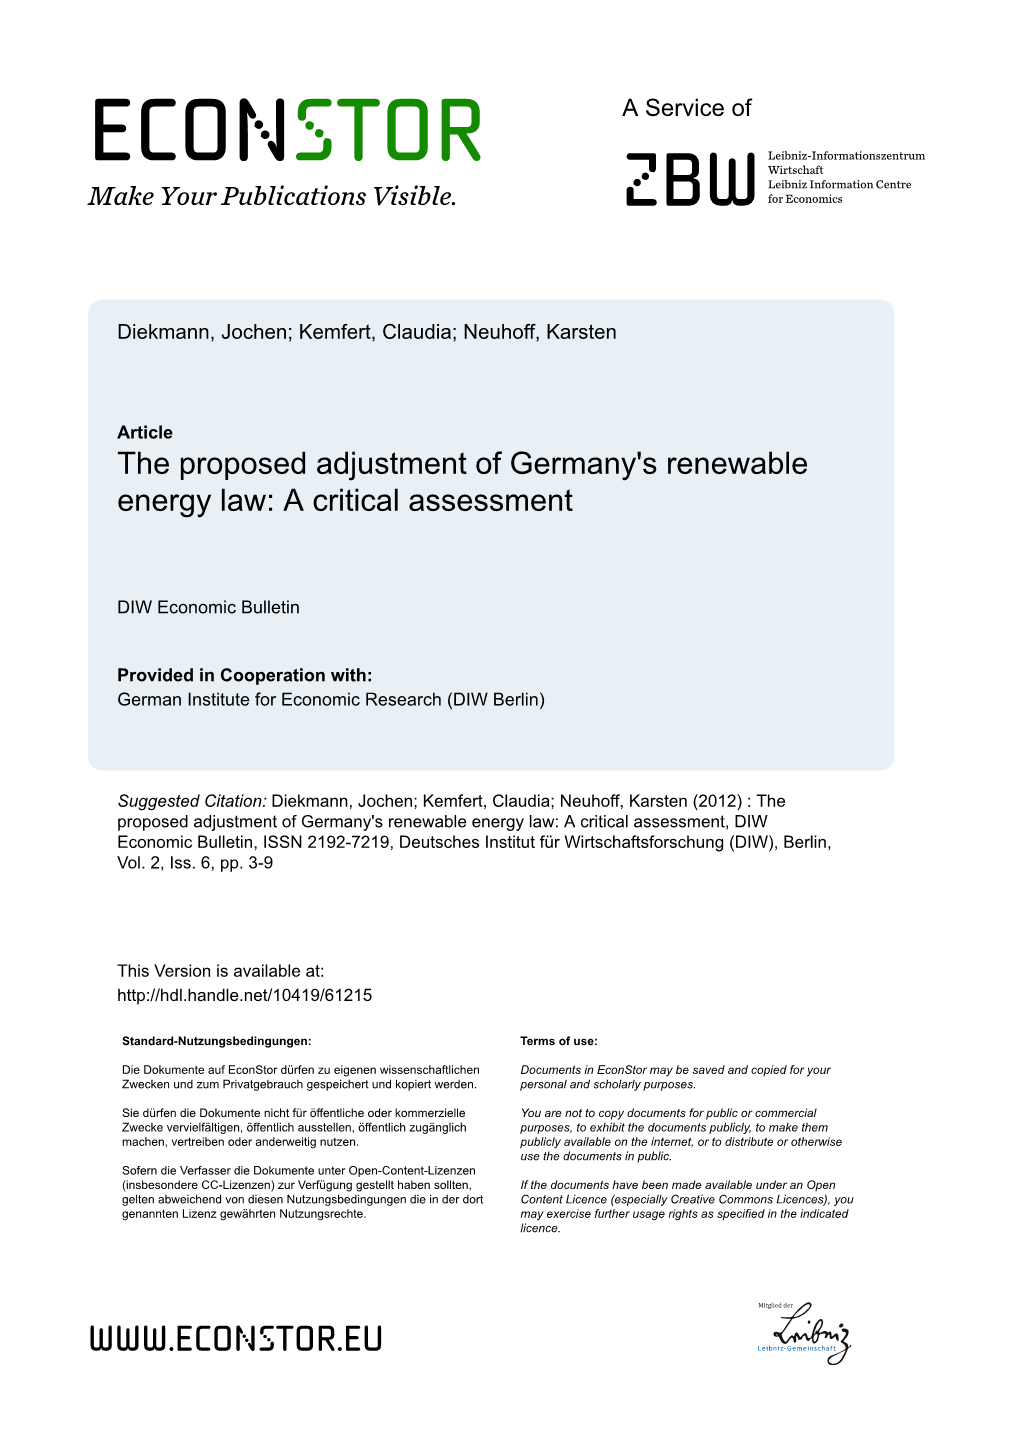 The Proposed Adjustment of Germany's Renewable Energy Law: a Critical Assessment